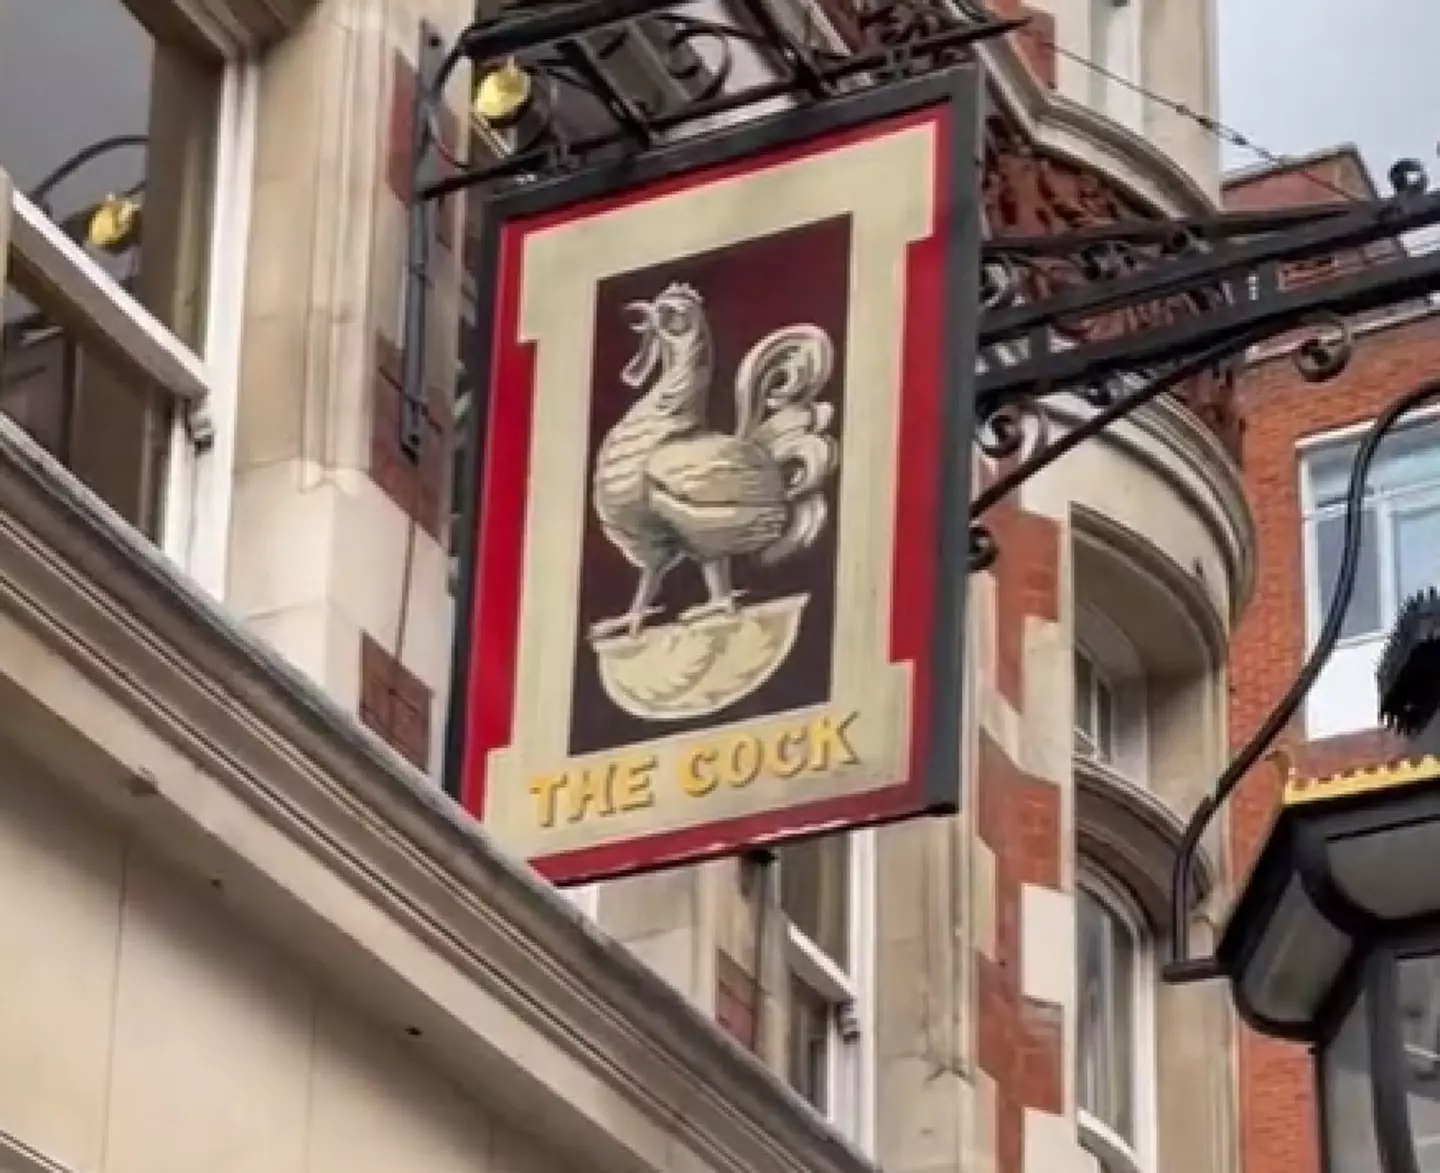 A pub called The Cock? Won't somebody please think of the children!?